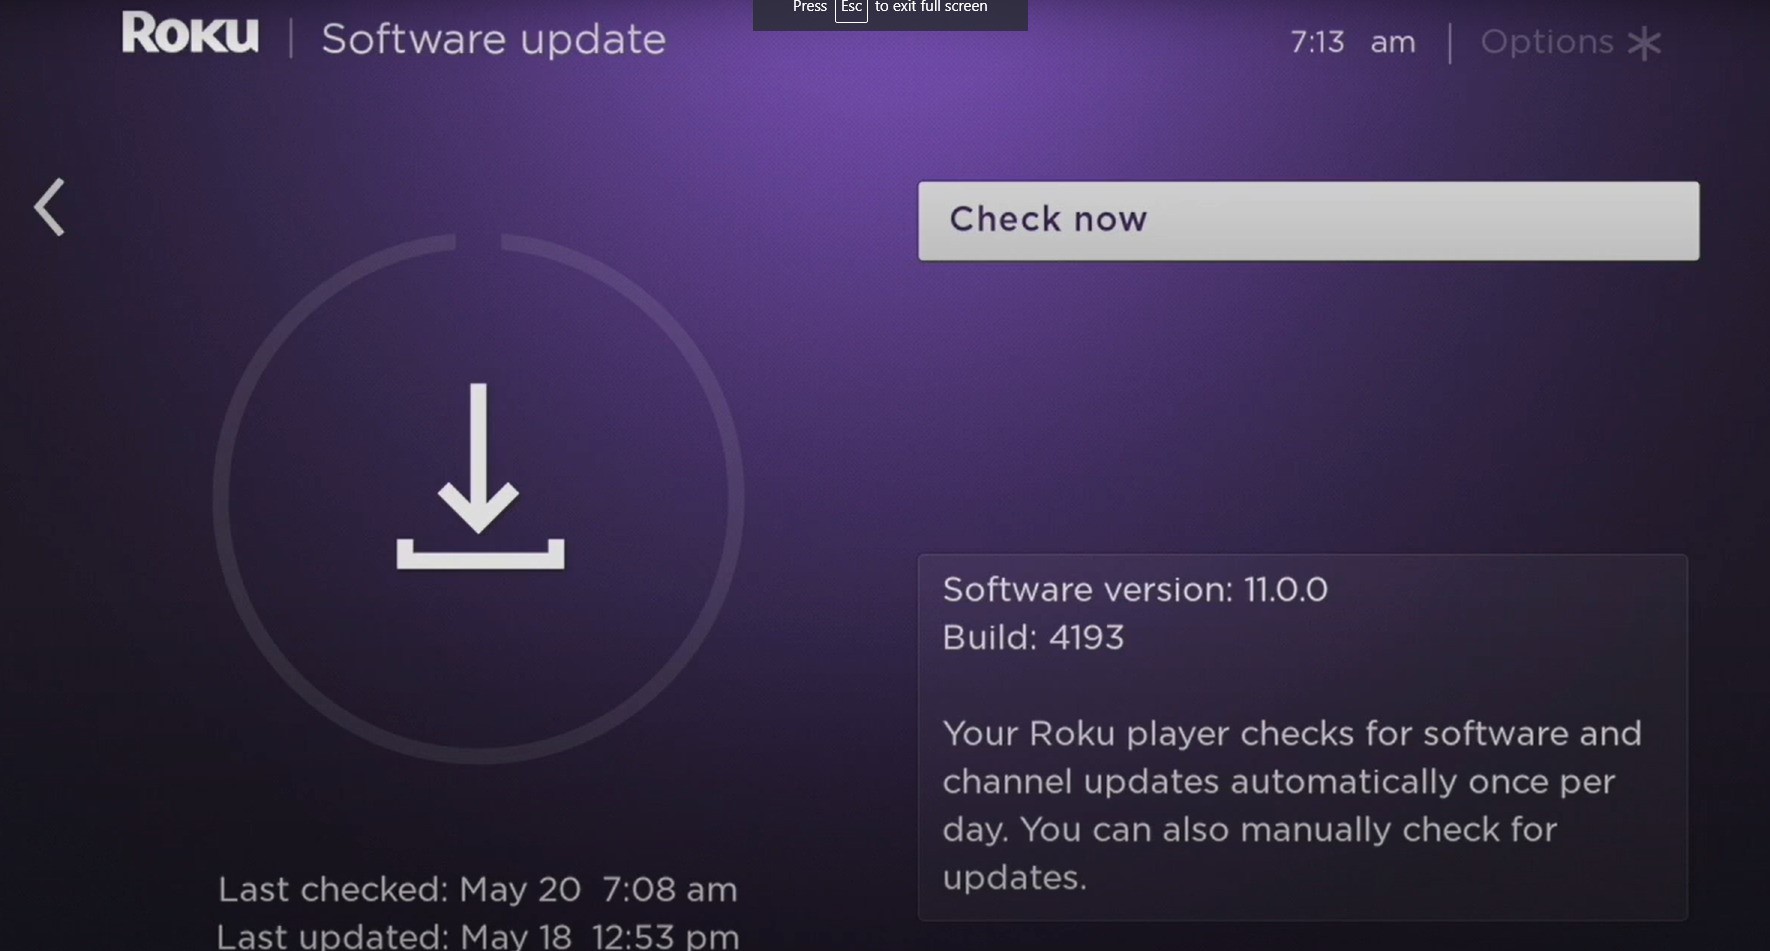 Manually Checking for updates on the Roku Device